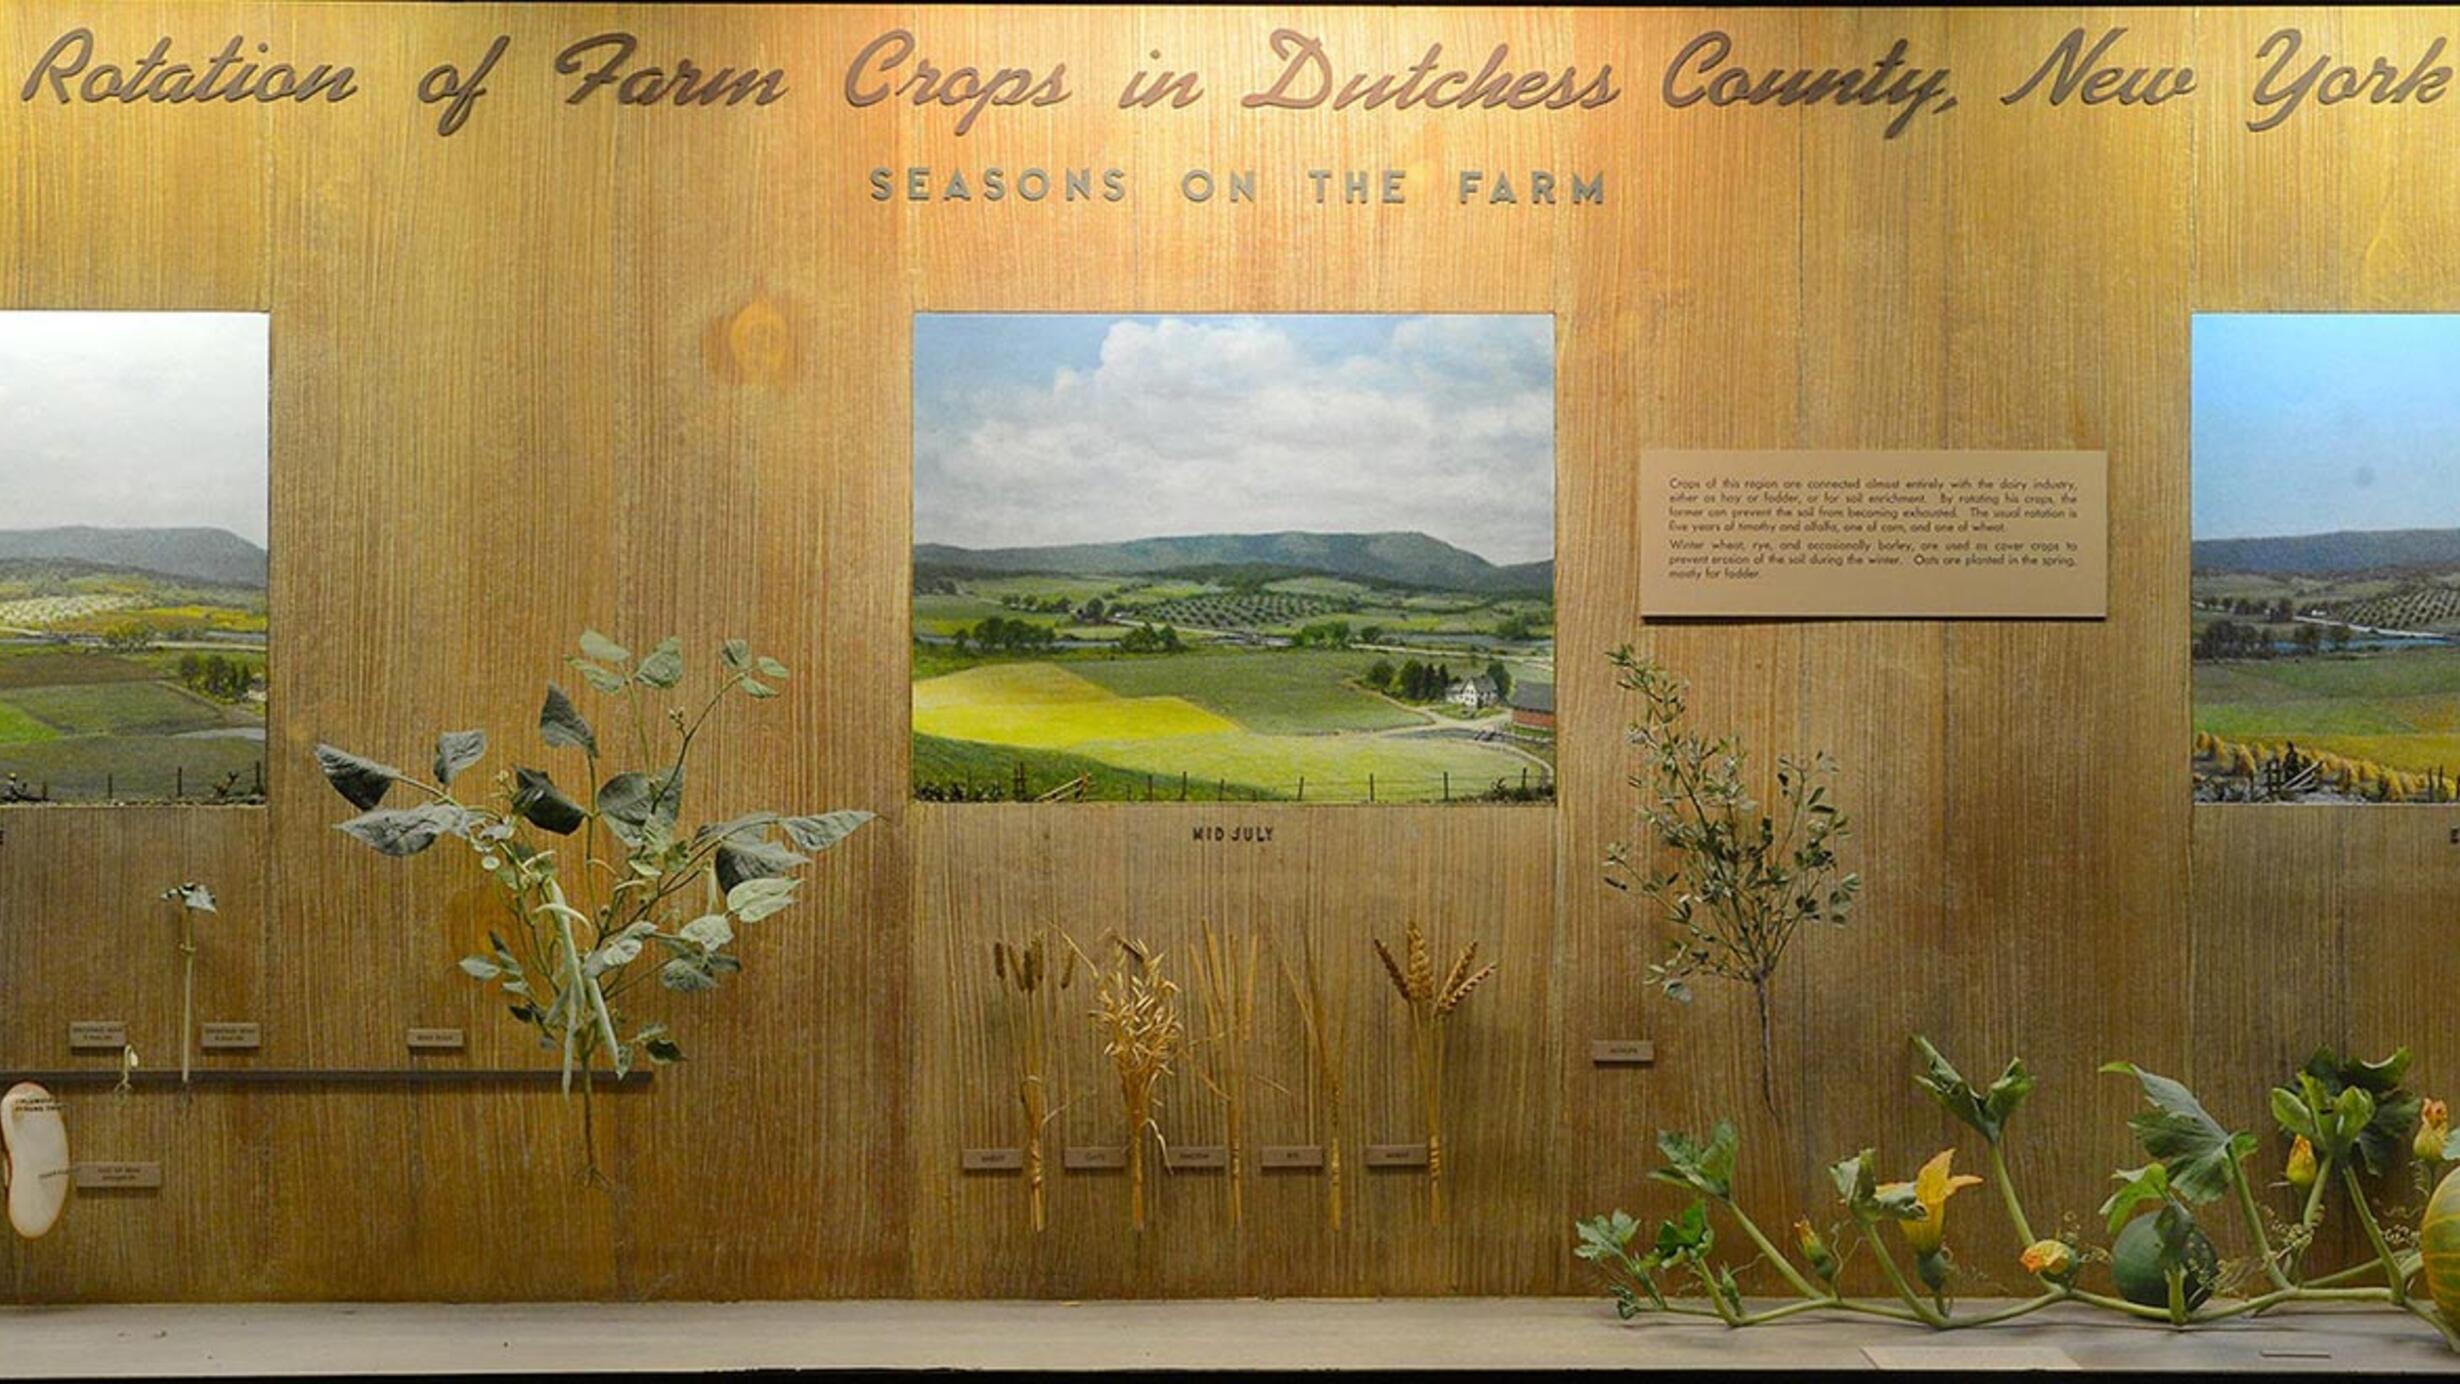 Museum window showing dioramas and models illustrating the rotation of farm crops in Dutchess County.